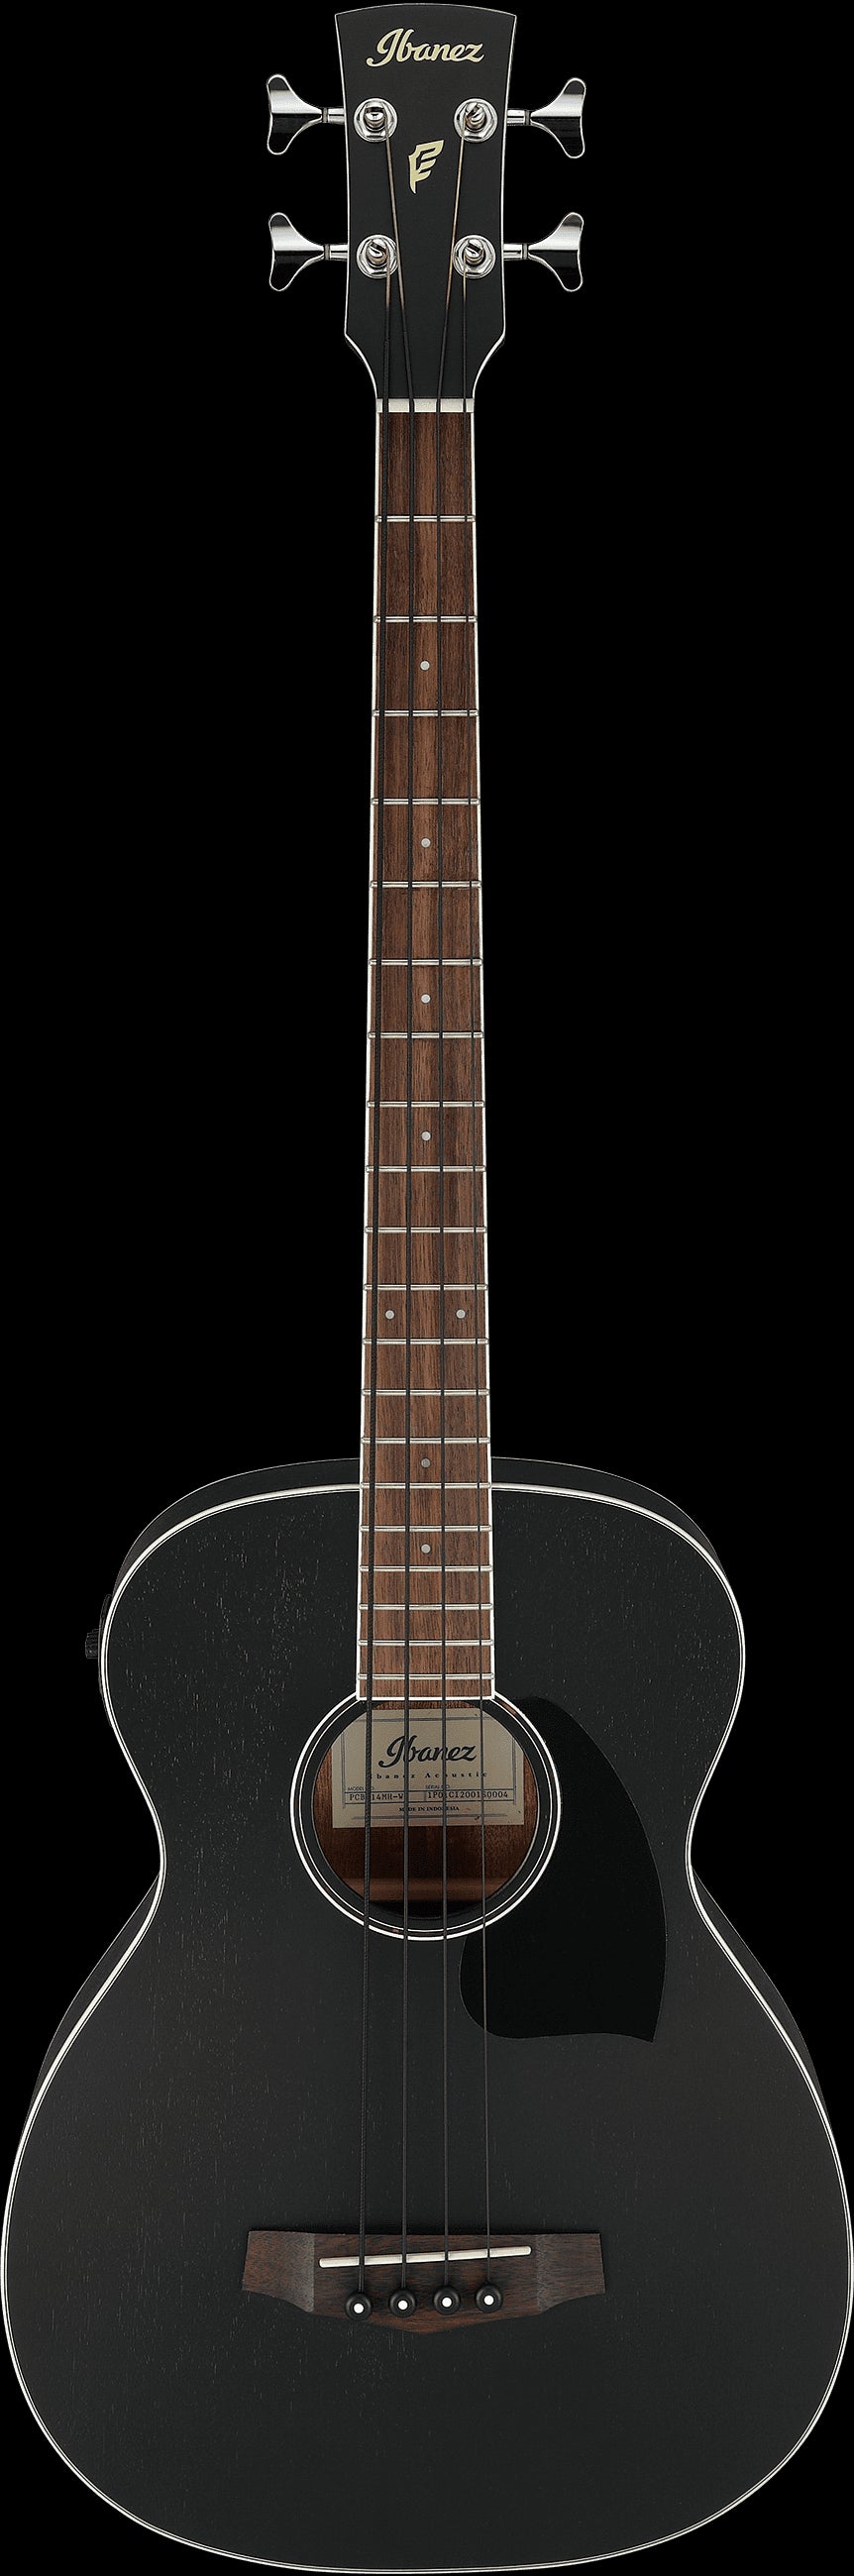 Ibanez PCBE14MH Acoustic Electric Bass Guitar - Weathered Black